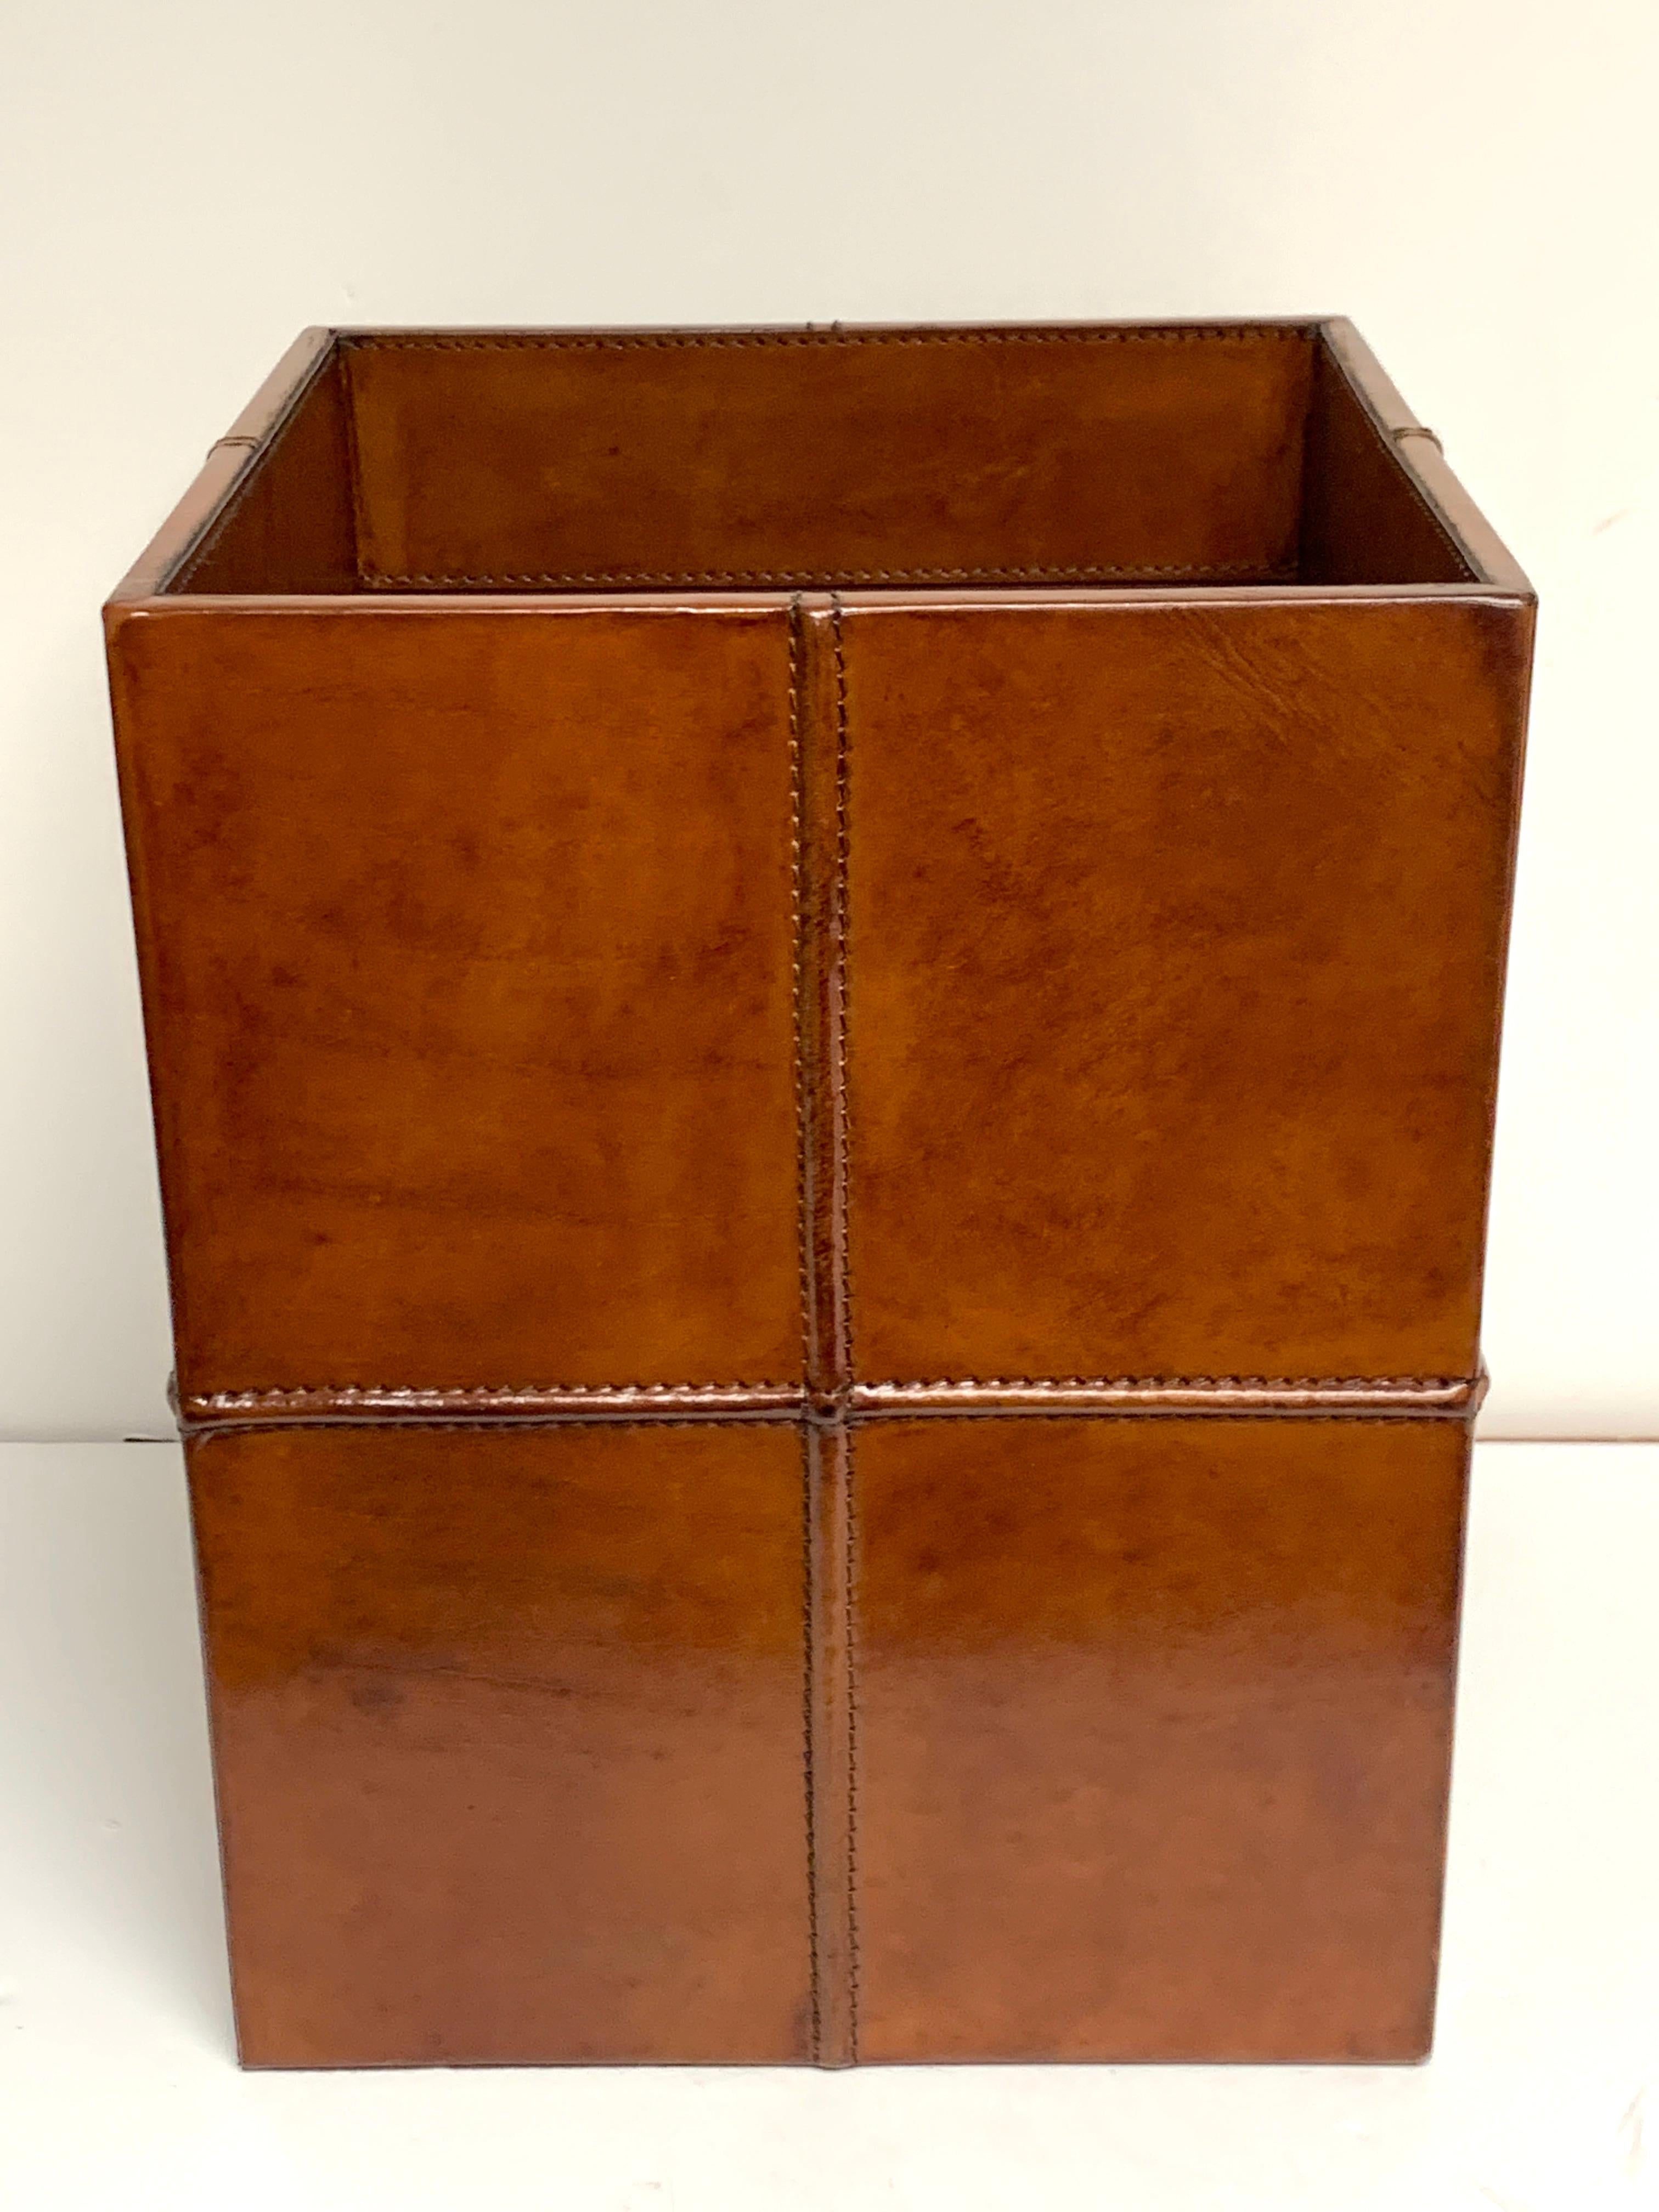 French modern stitched leather cube wastepaper basket, this is an original vintage model.